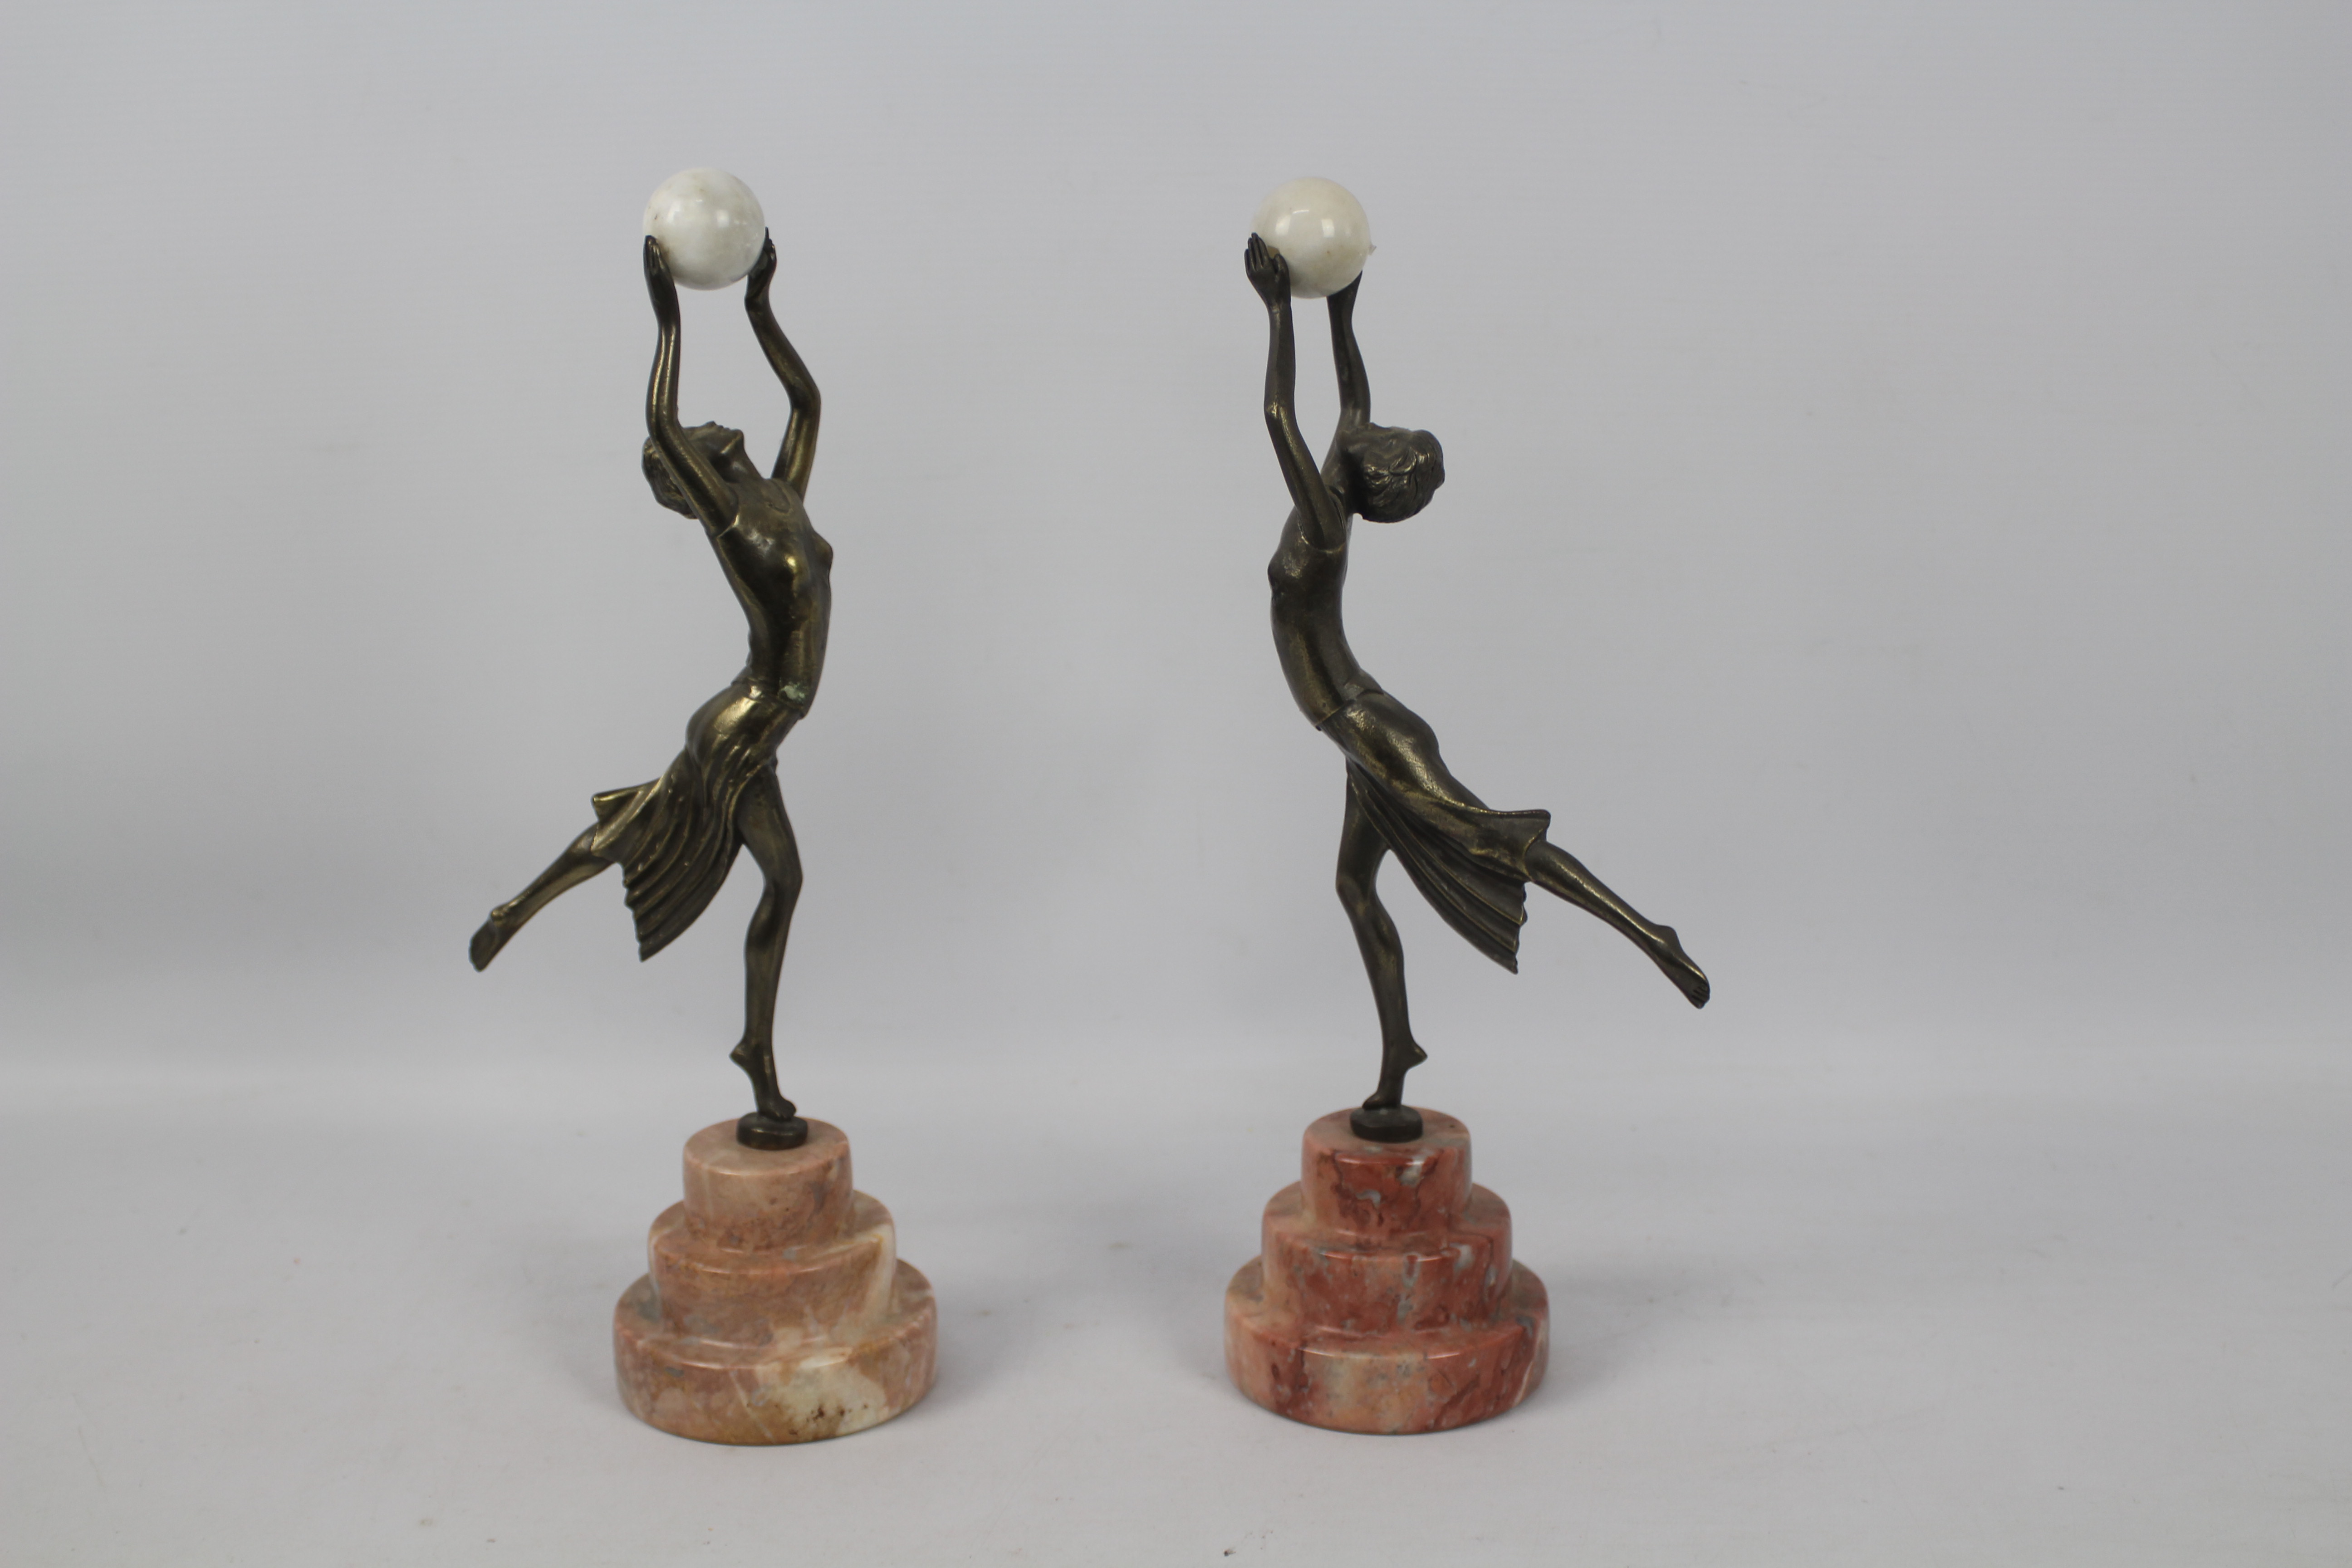 A pair of Art Deco style sculptures modelled as female figures holding aloft spheres,